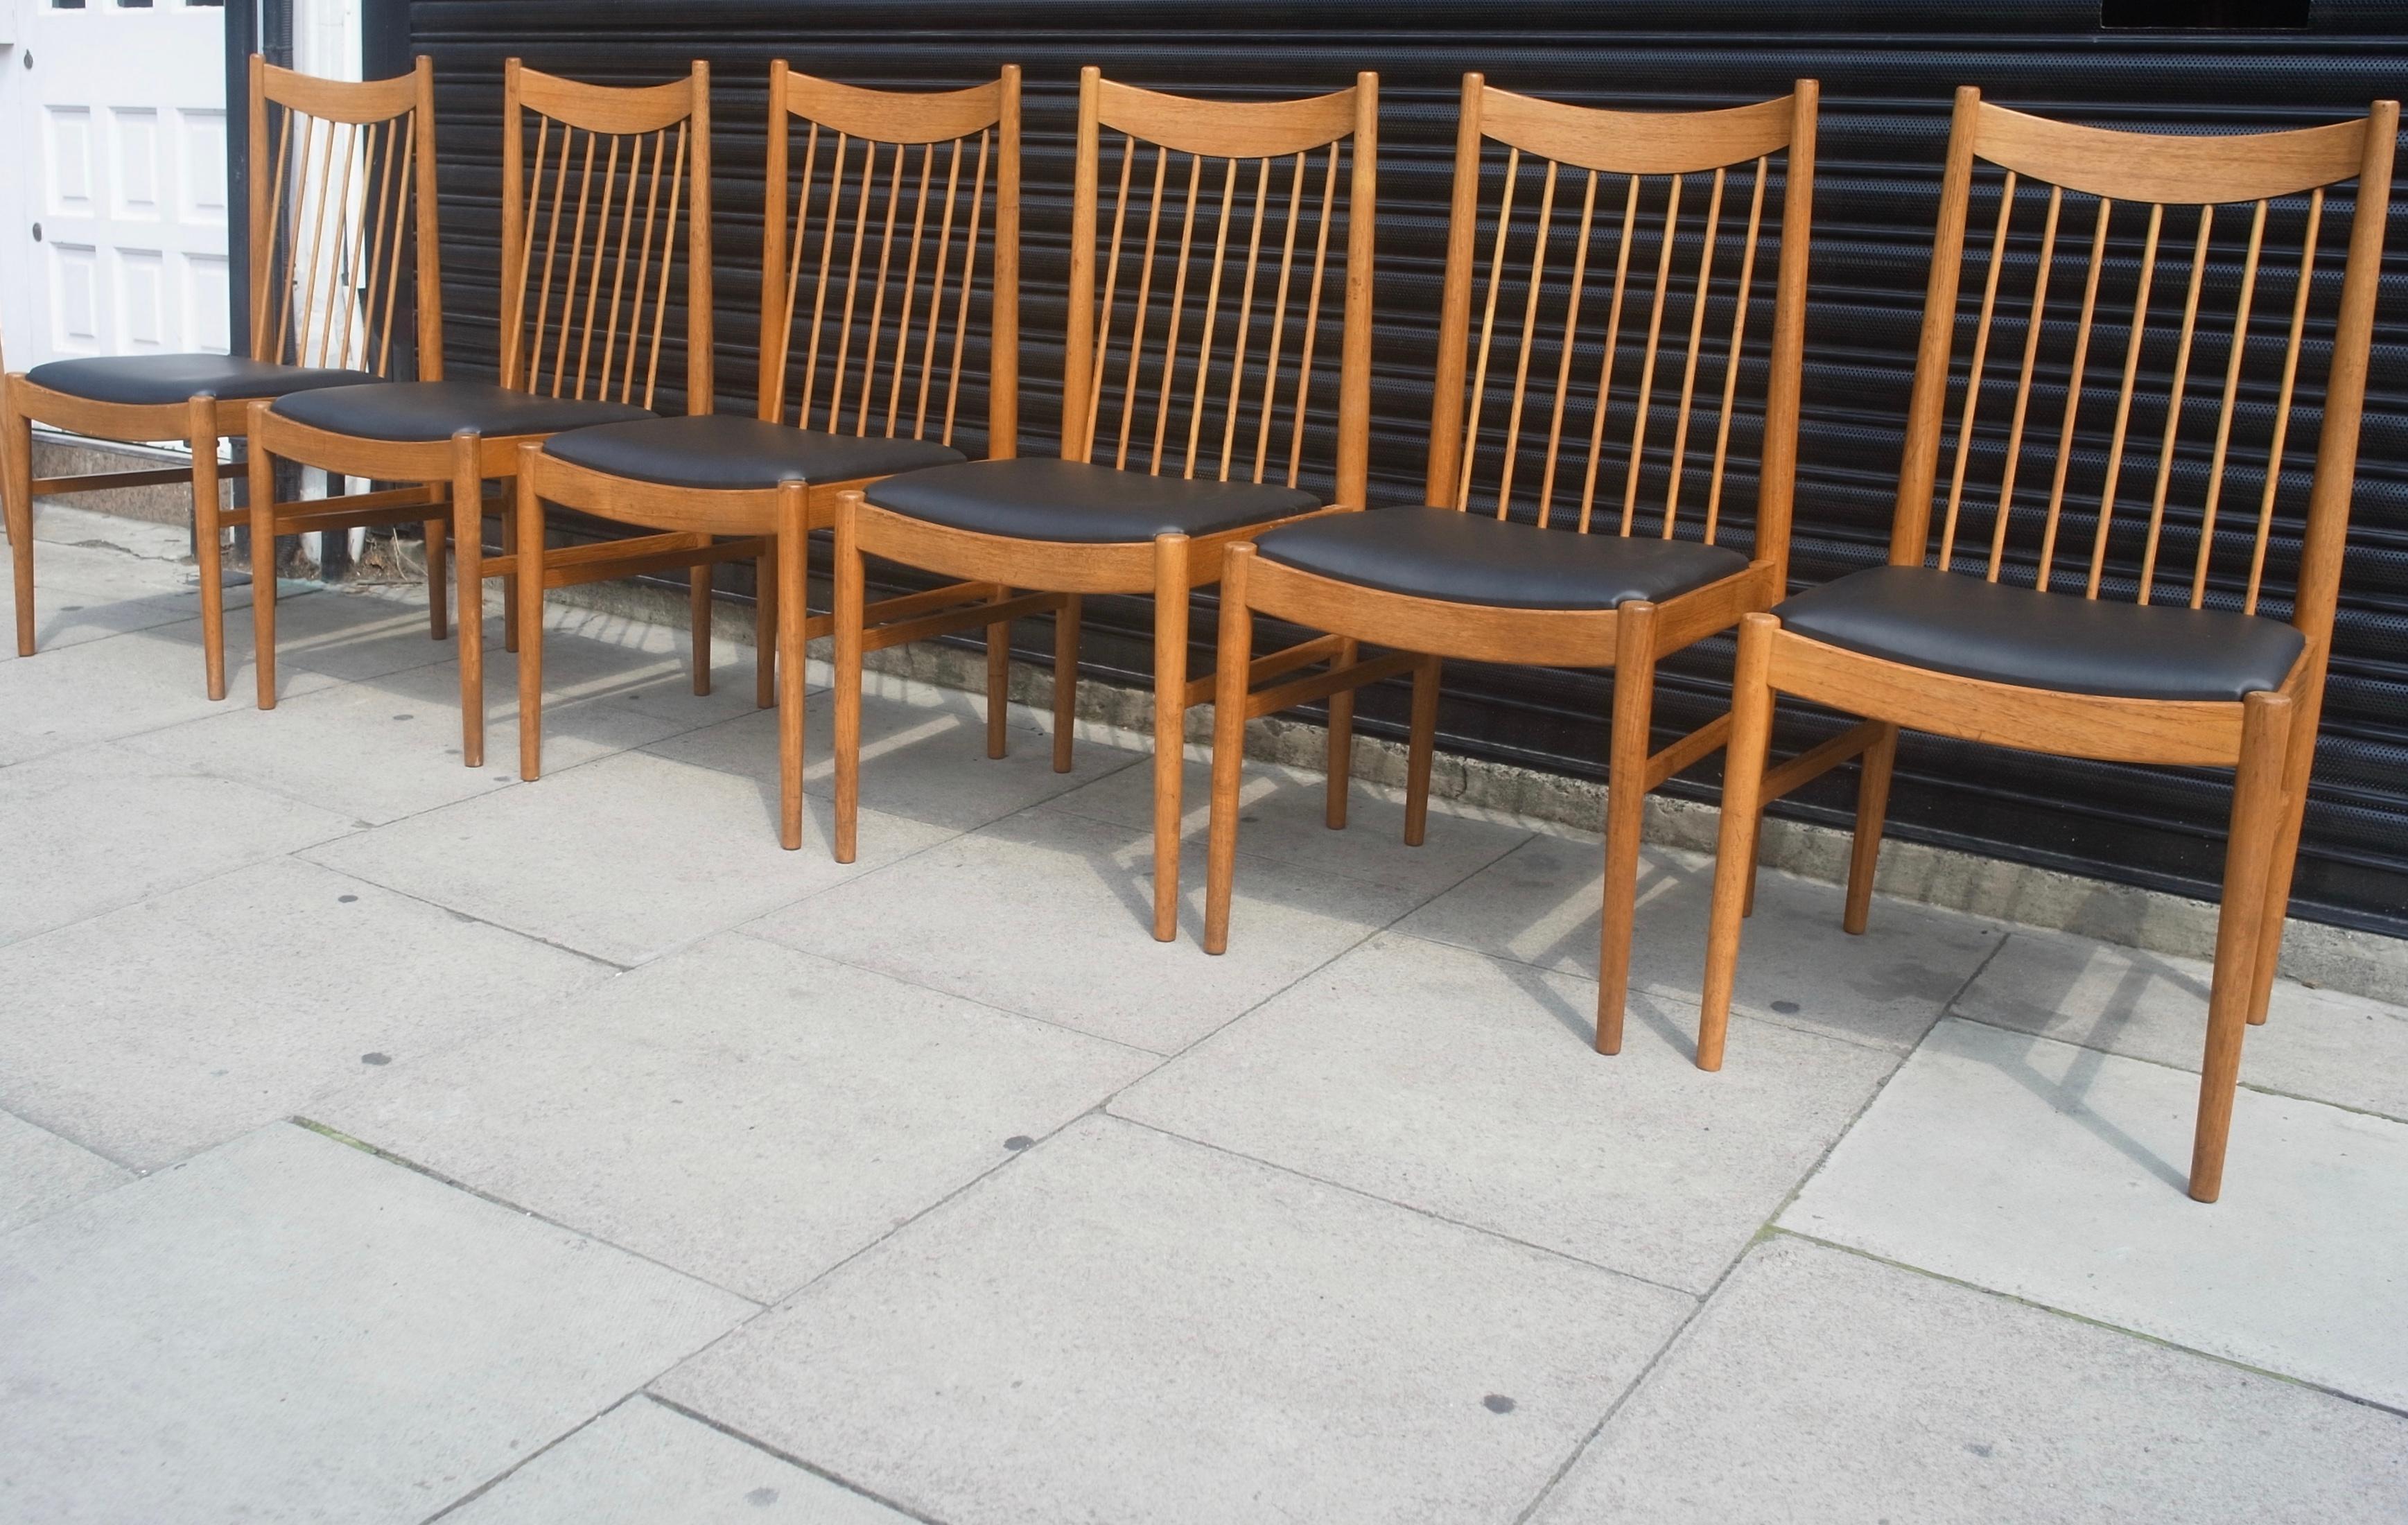 Six very elegant and beautifully proportioned vintage Danish 1960s, Teak framed, Arne Vodder, model 422, dining chairs. These fine dining chairs, have delicately carved spindled Teak struts supporting the back, and are set on elegant solid Teak